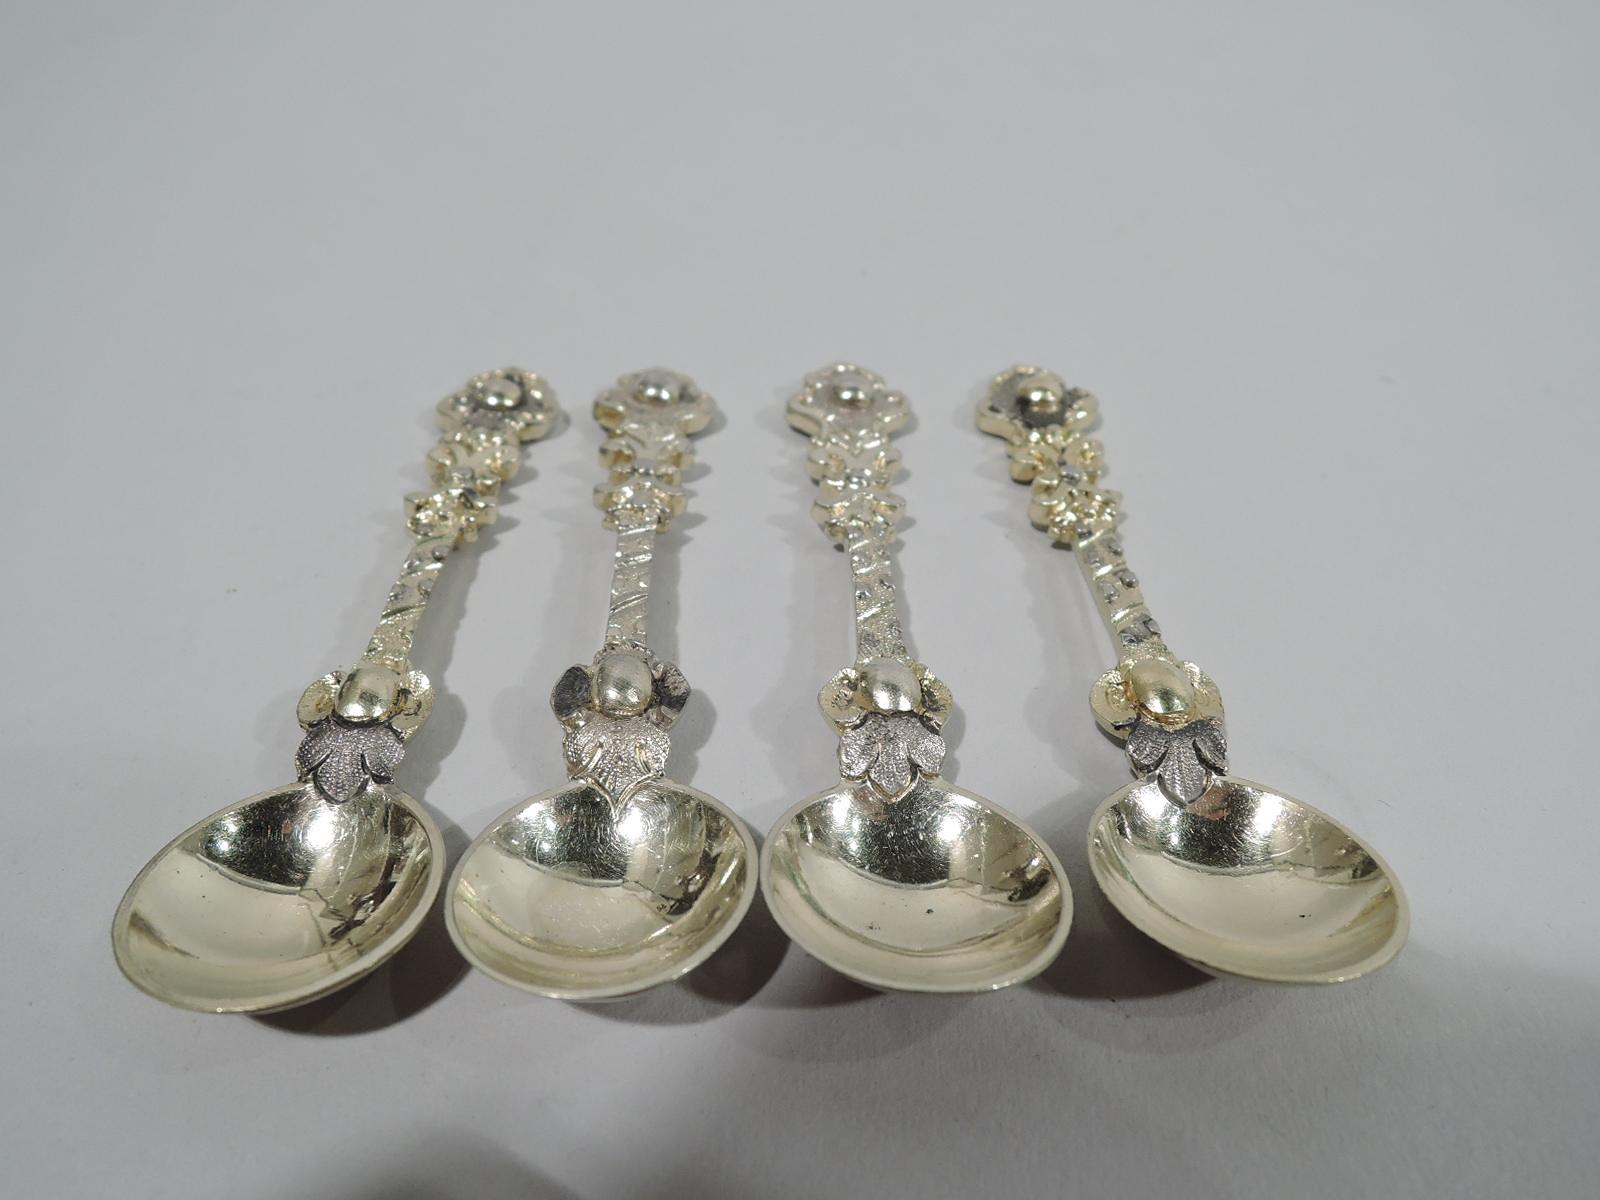 Set of 4 Victorian gilt sterling silver salt spoons. Made by William Edwards in London in 1872-3. Each: Shaft studded with bead and leaf base. Terminal shaped with central bead. Verso has stylized leaf mount. Round bowl. Fully marked. Total weight: